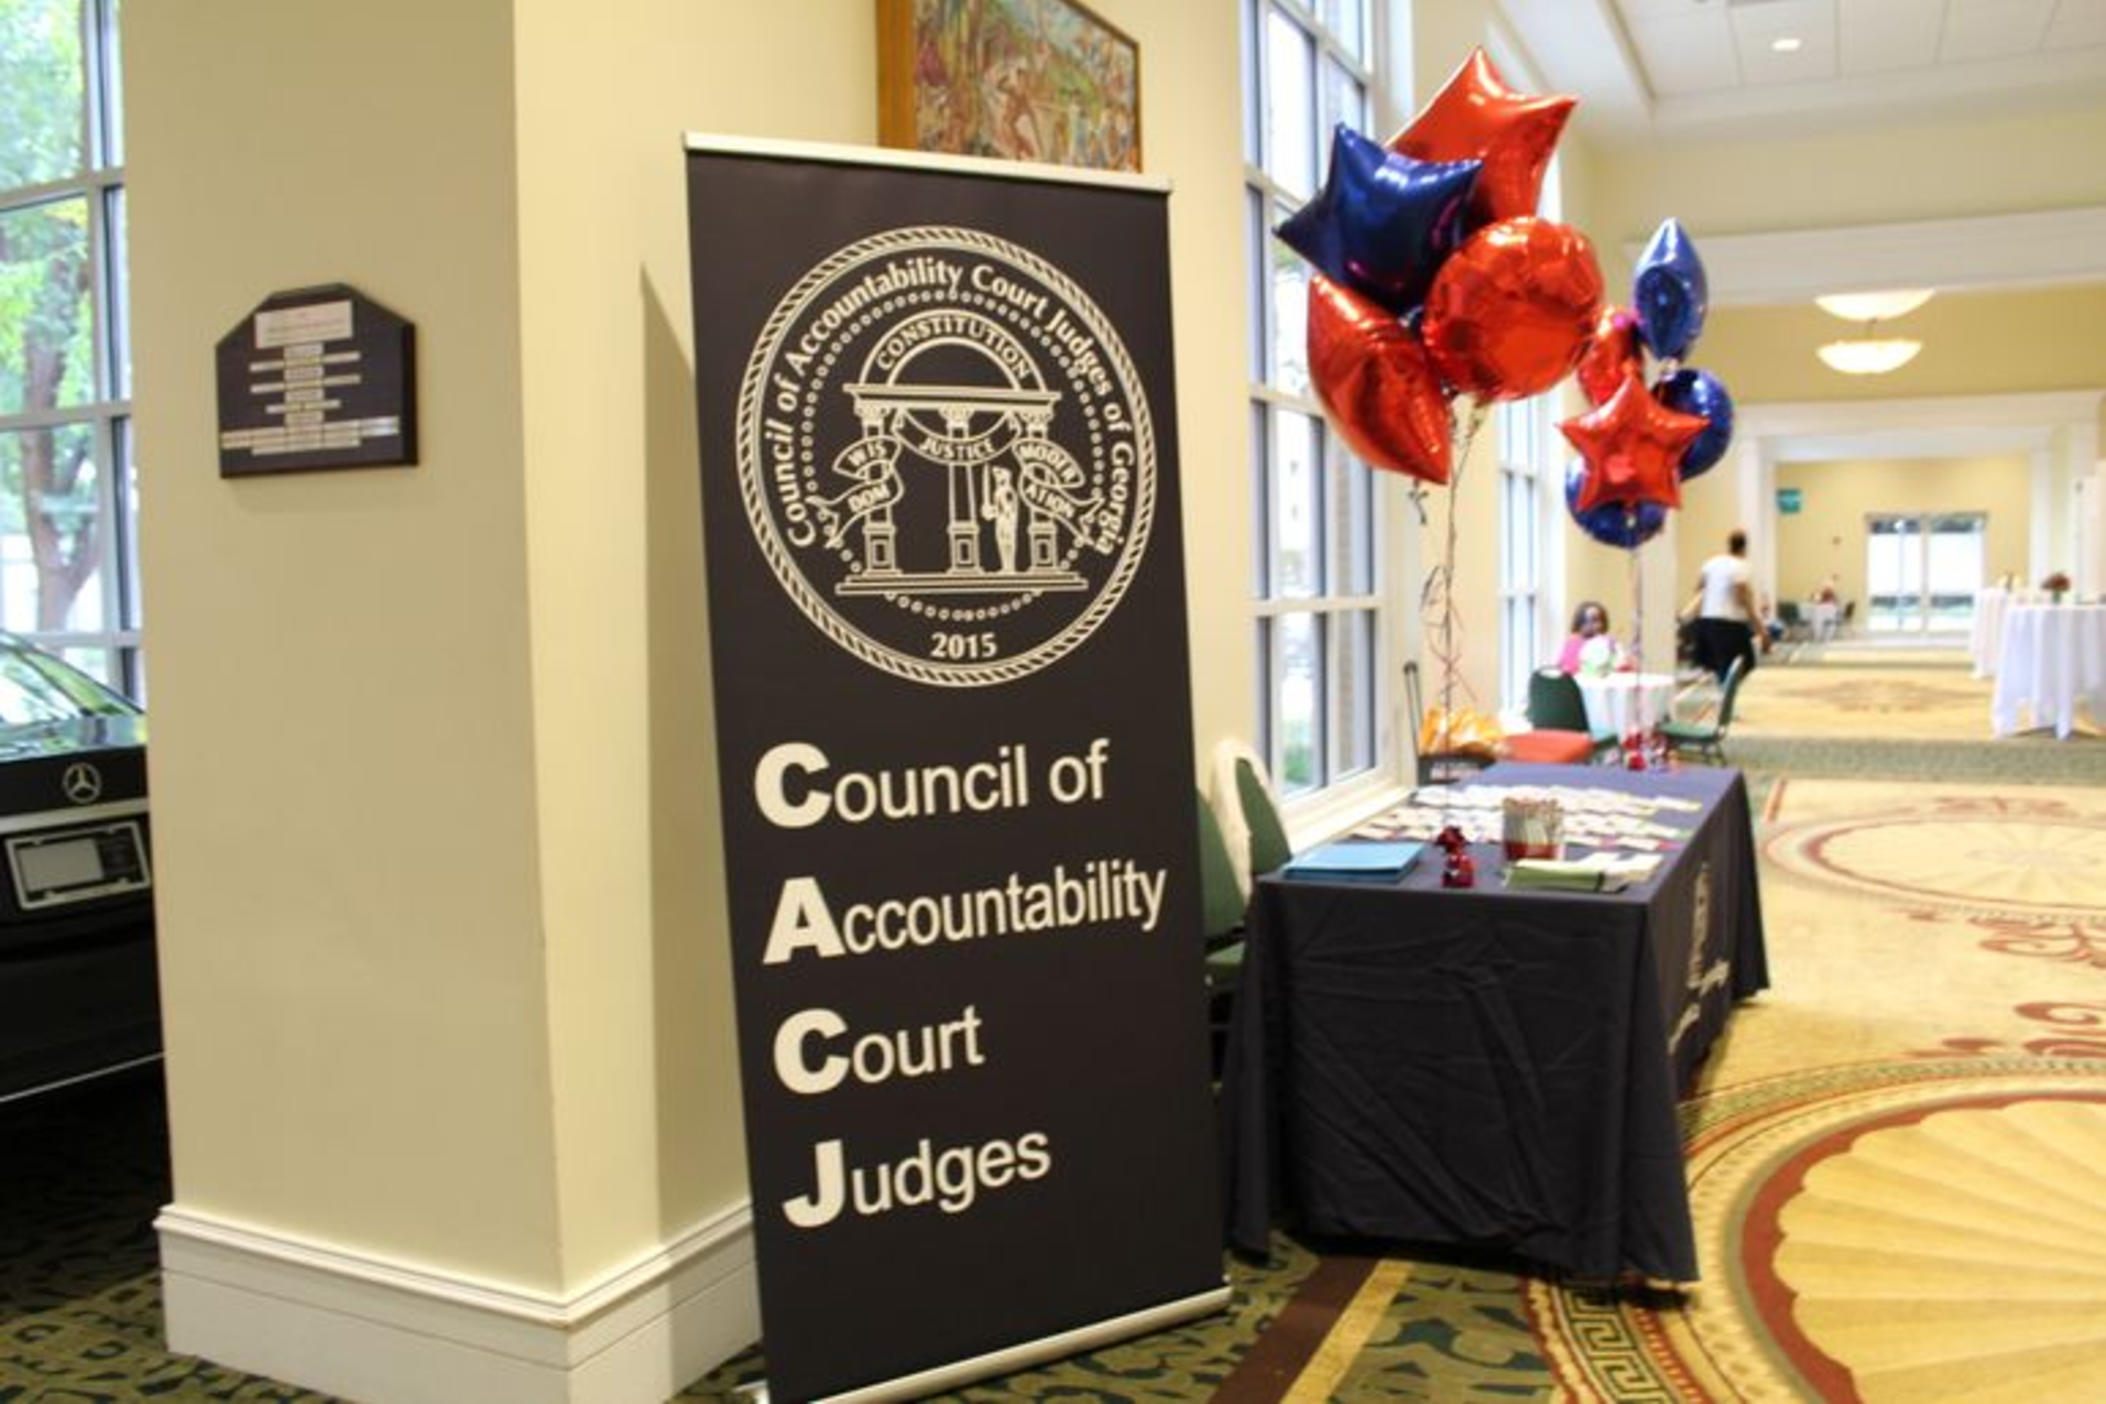 Training Cloned Council of Accountability Court Judges